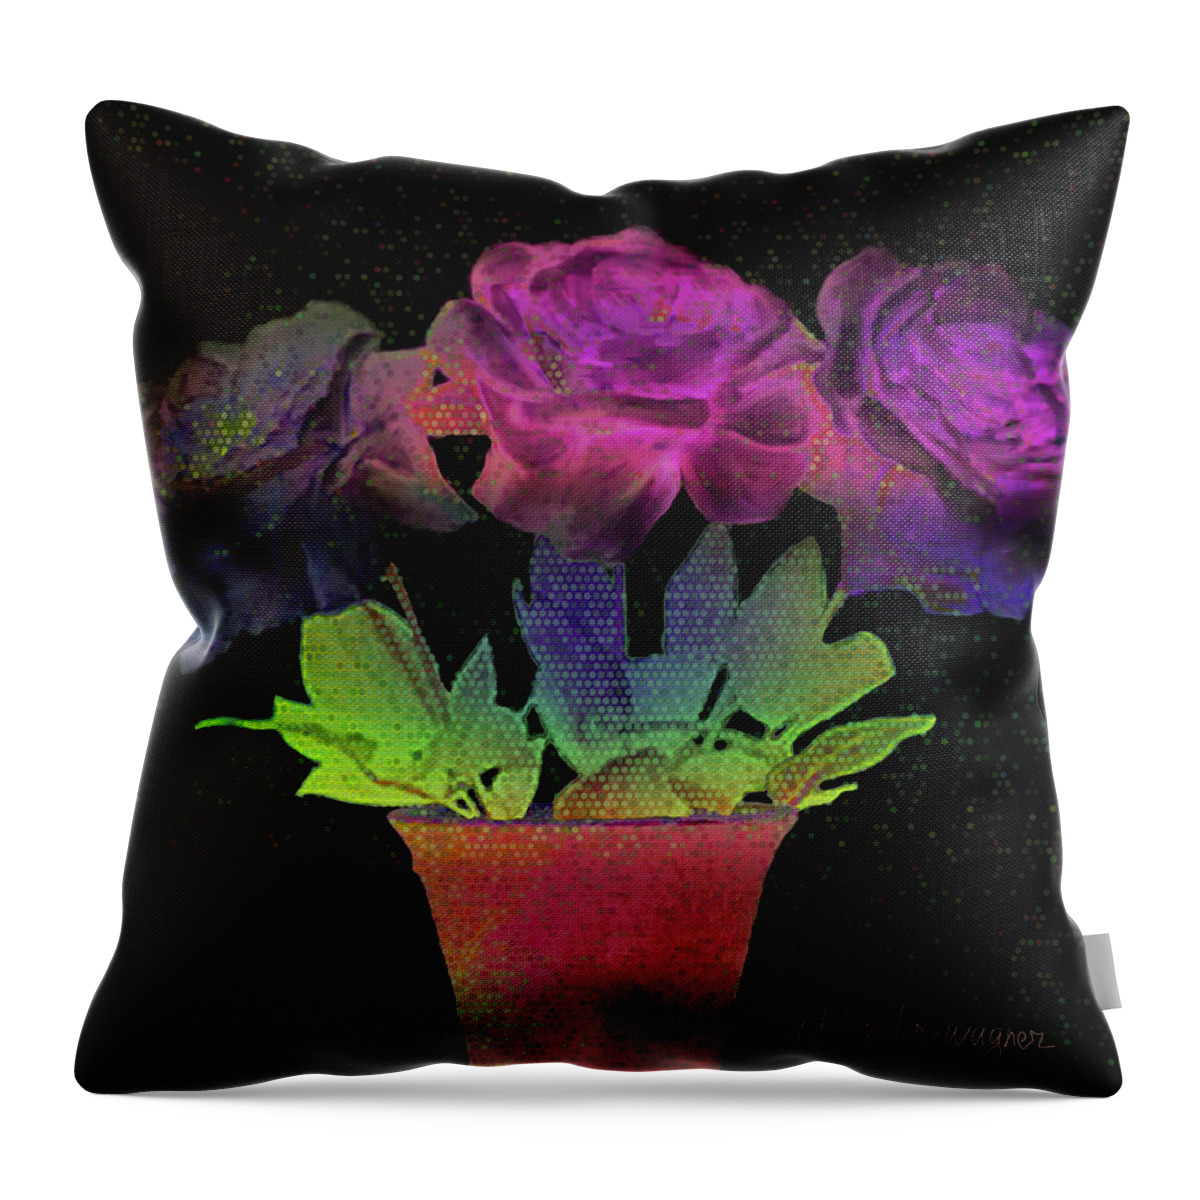 Rose Throw Pillow featuring the digital art Dramatic Roses by Arline Wagner